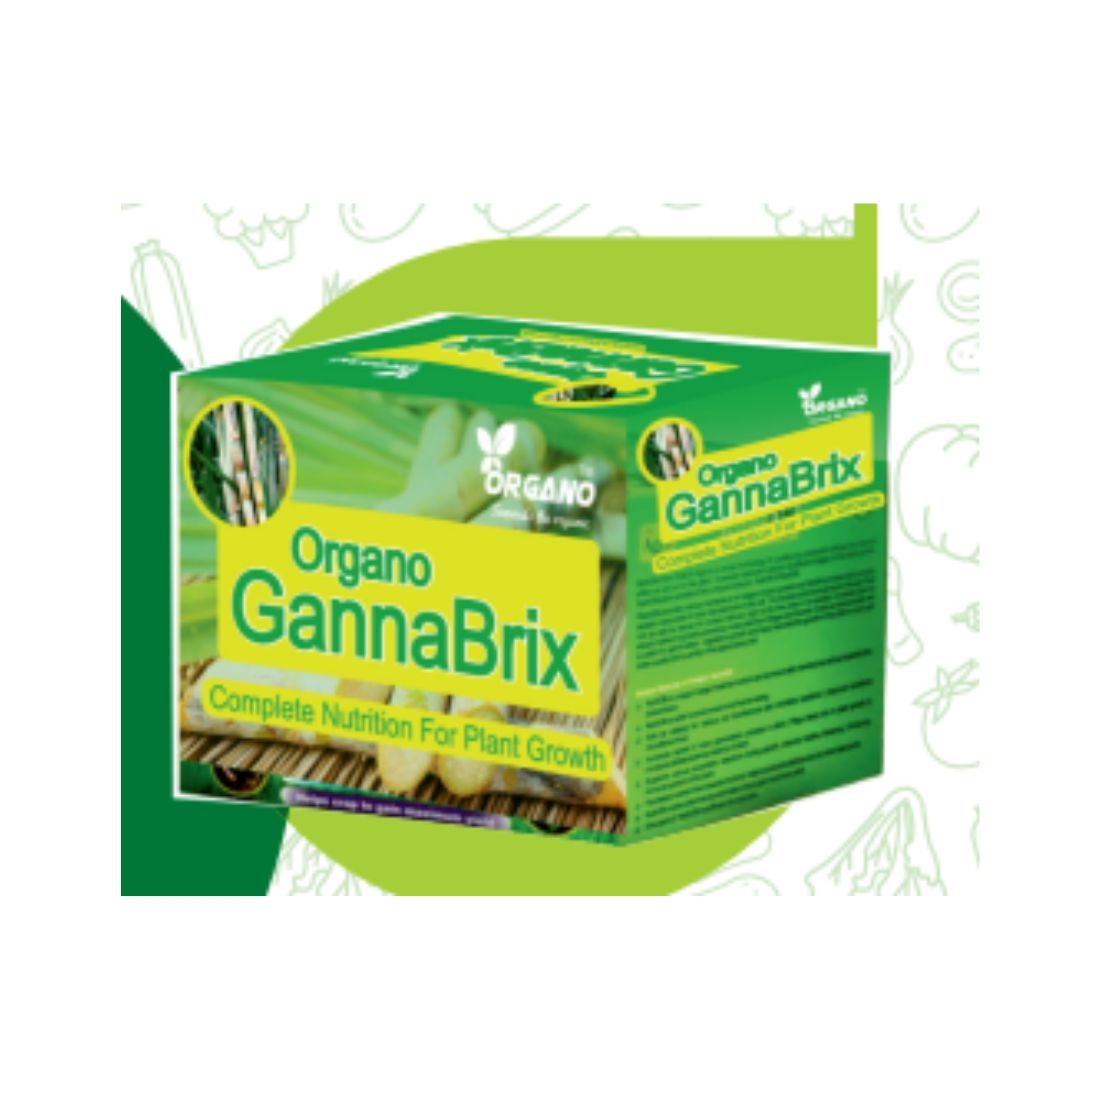 Organo GannaBrix - Complete Nutrition's for Plant Growth kit  - 5kg